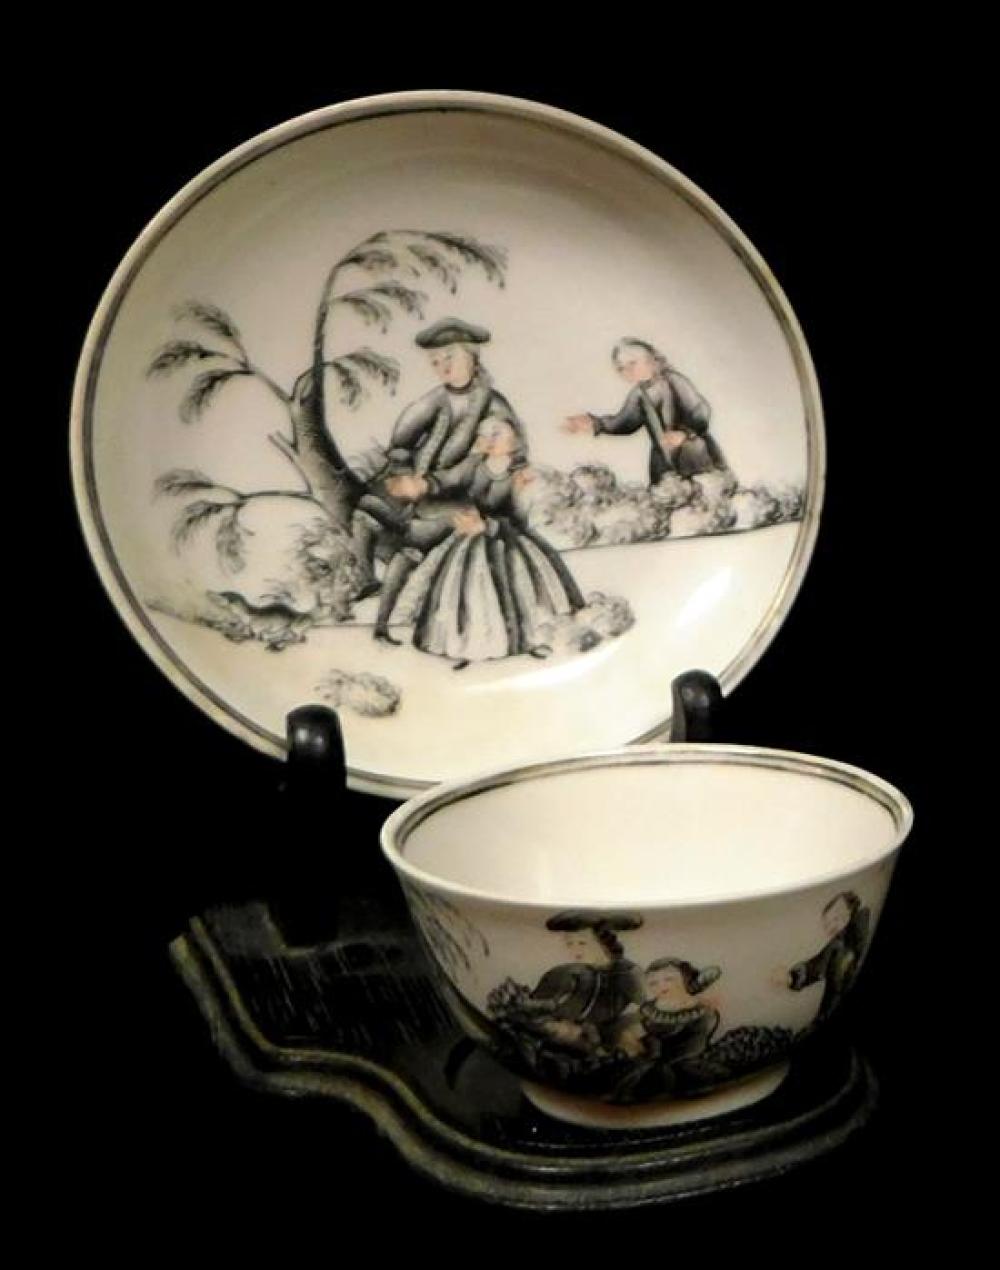 ASIAN: 18TH C. CHINESE EXPORT PORCELAIN